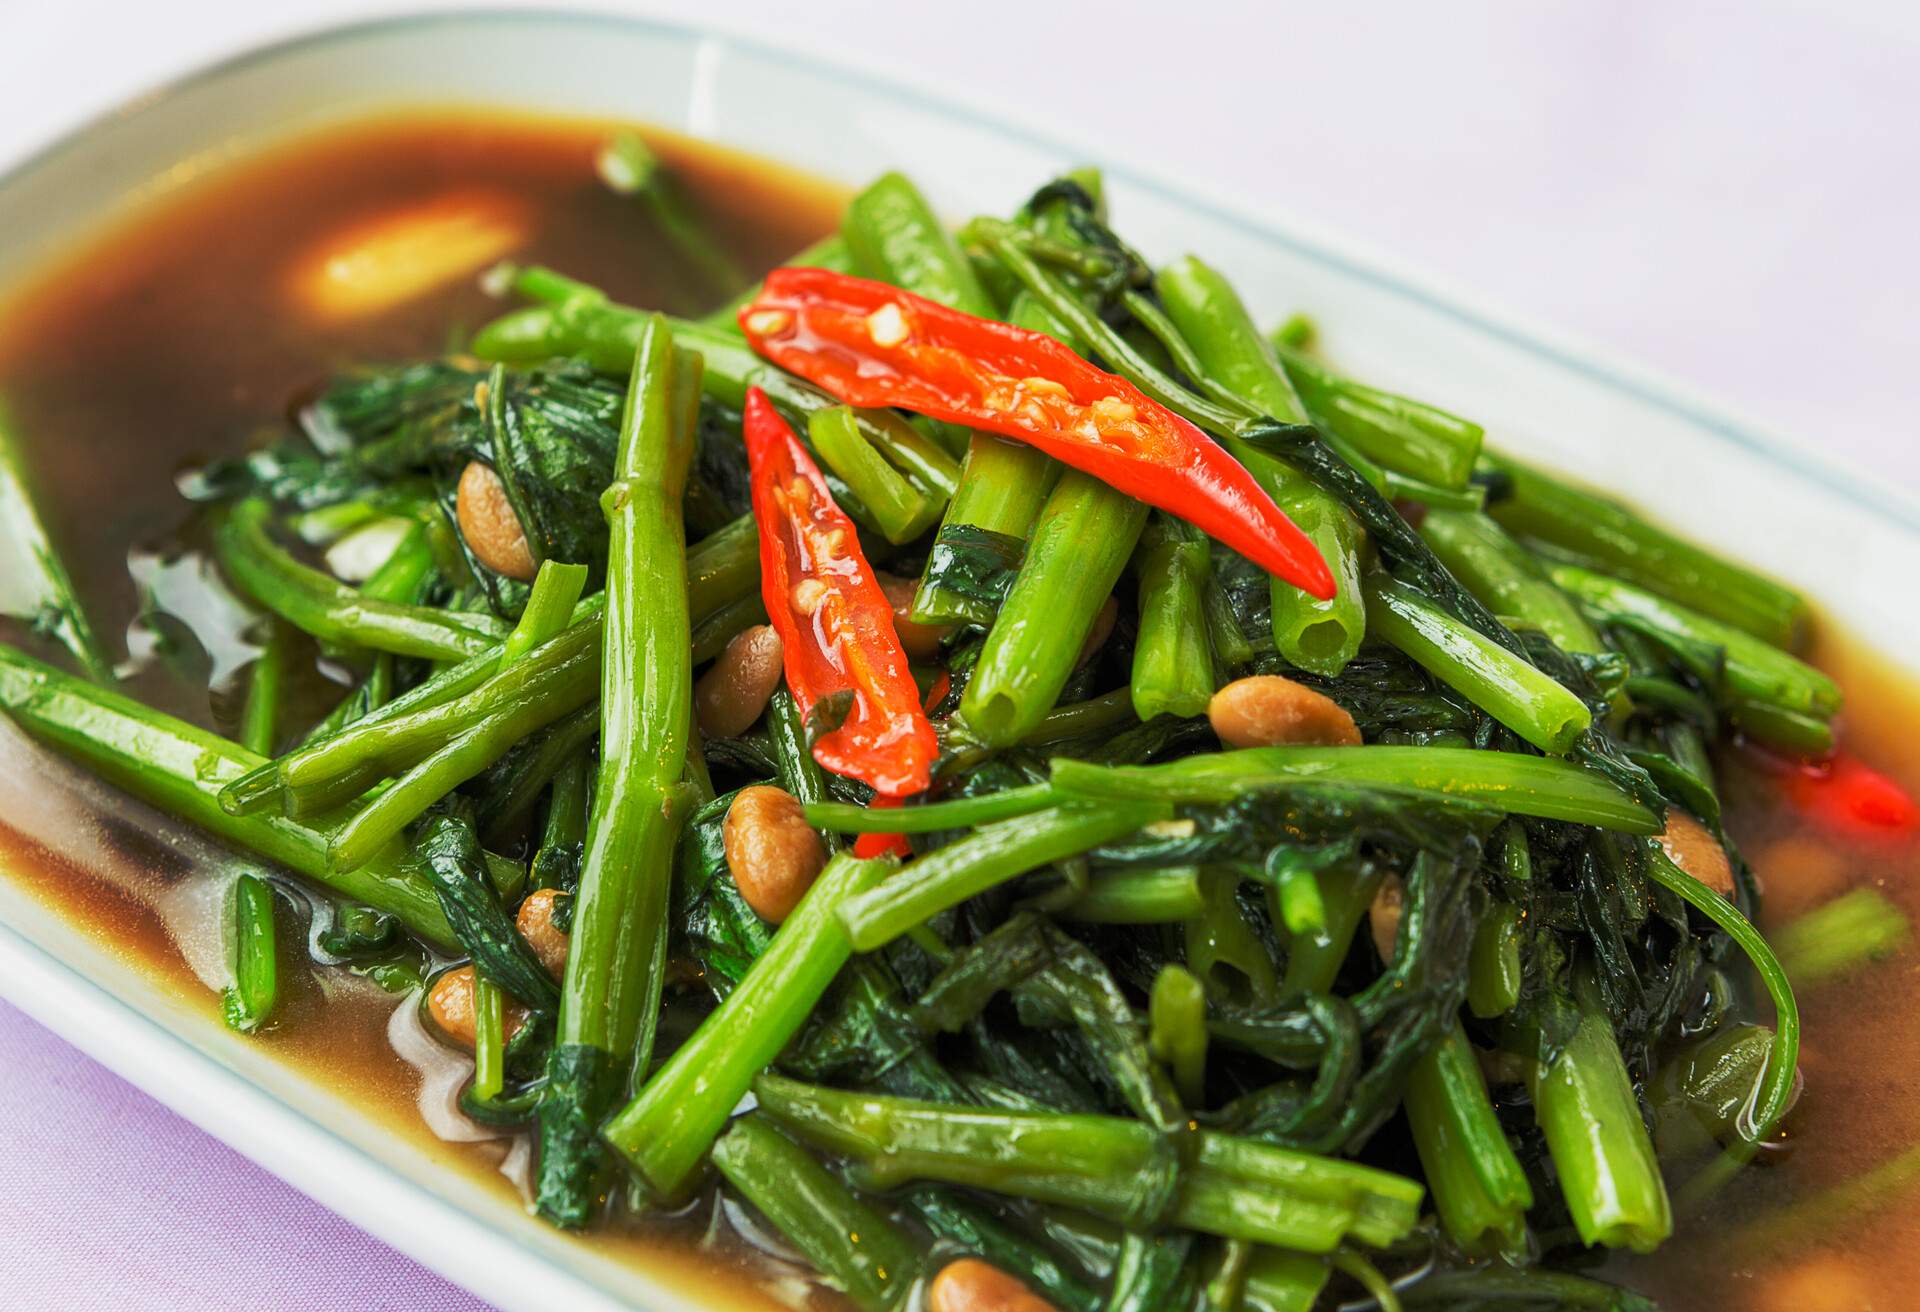 A hot and spicy stir-fried morning glory is a Thai's favorite dish and very easy to make.